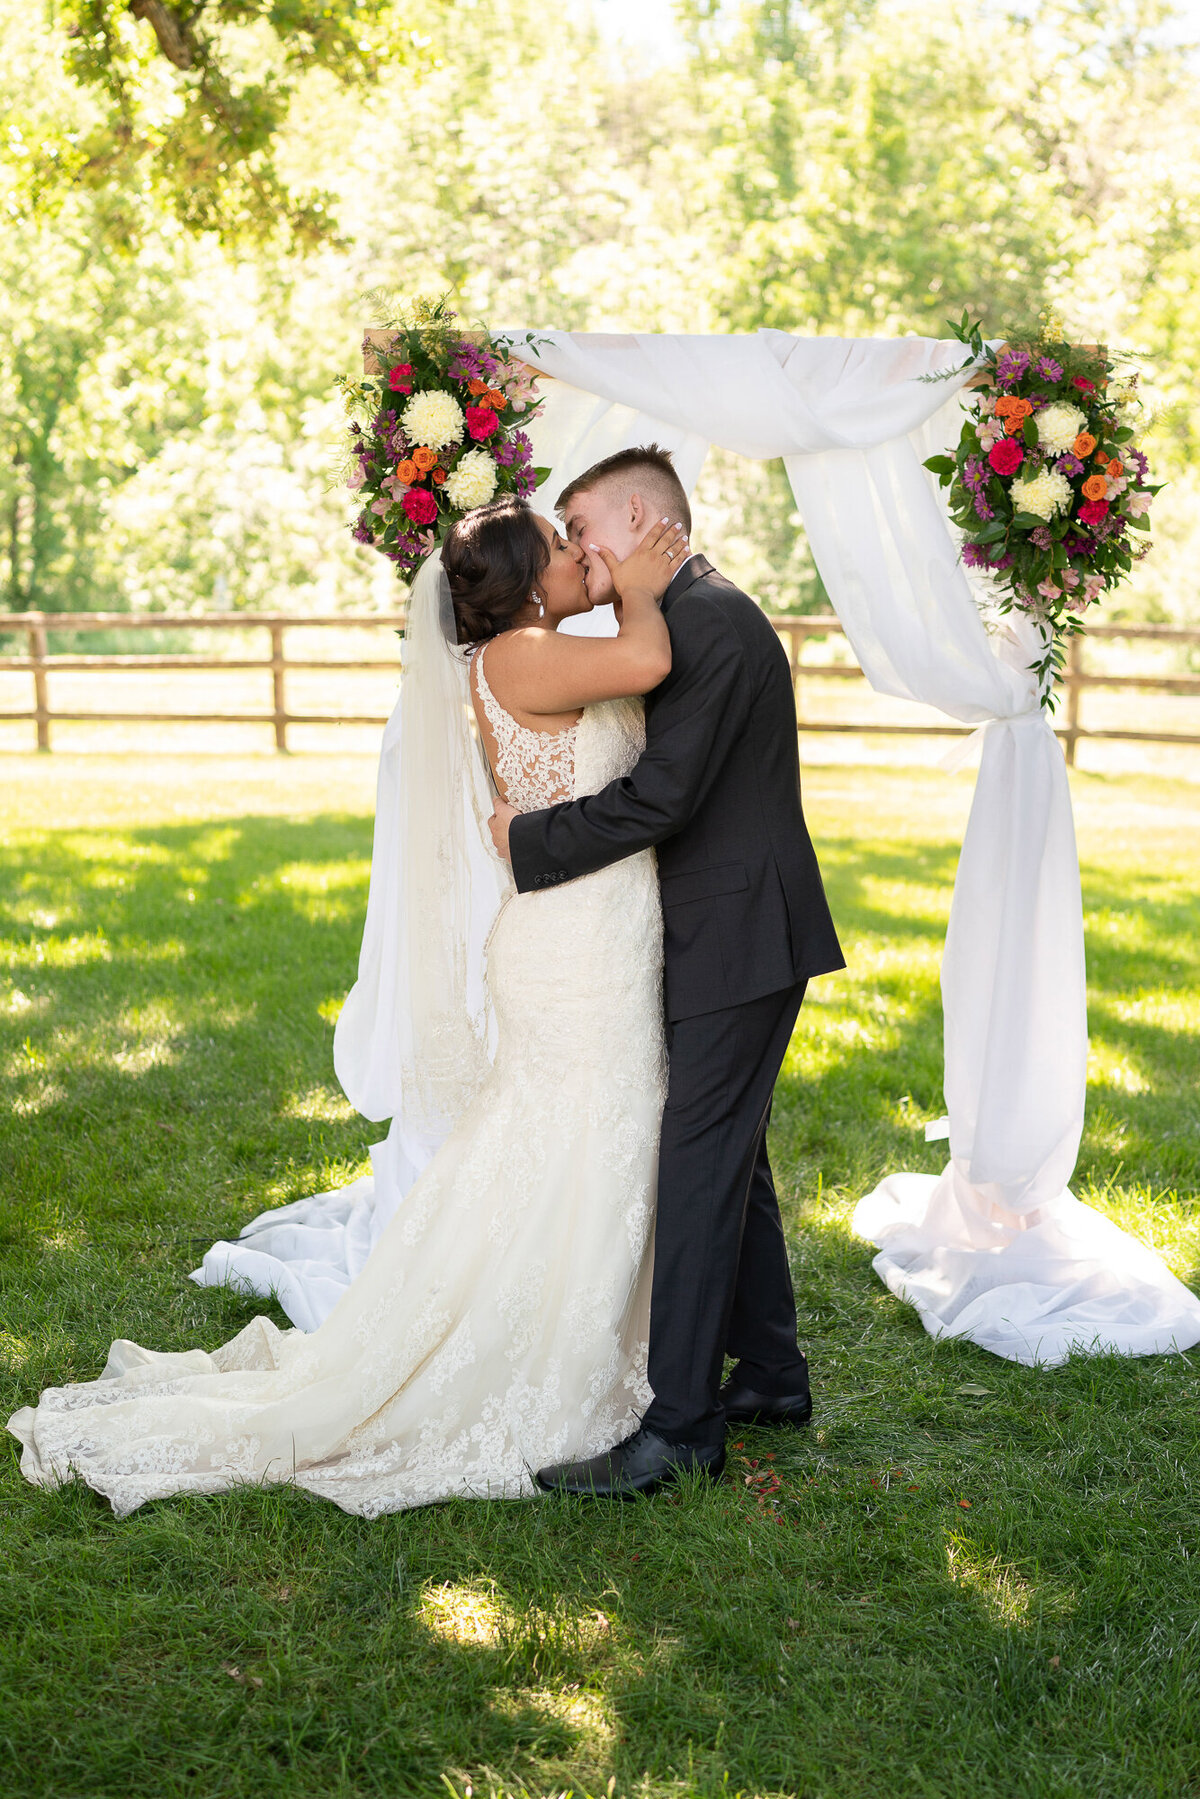 Bride and groom kiss during wedding ceremony at Mayowood Stone Barn.